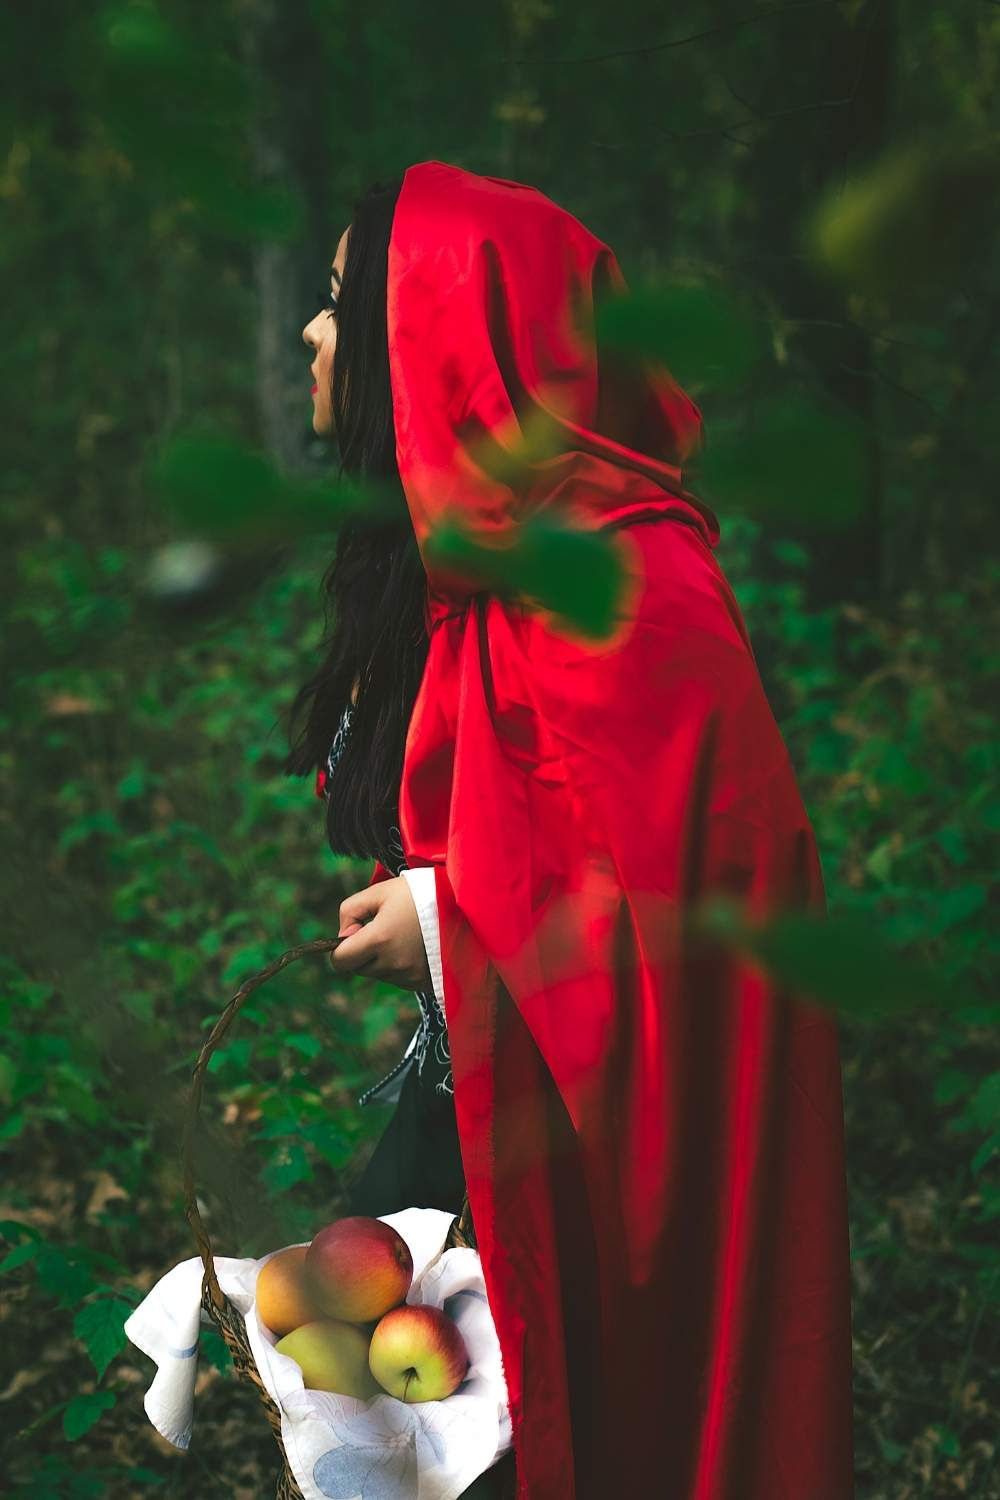 Woman wears red cape and carries a basket of apples, as a DIY Halloween costume.